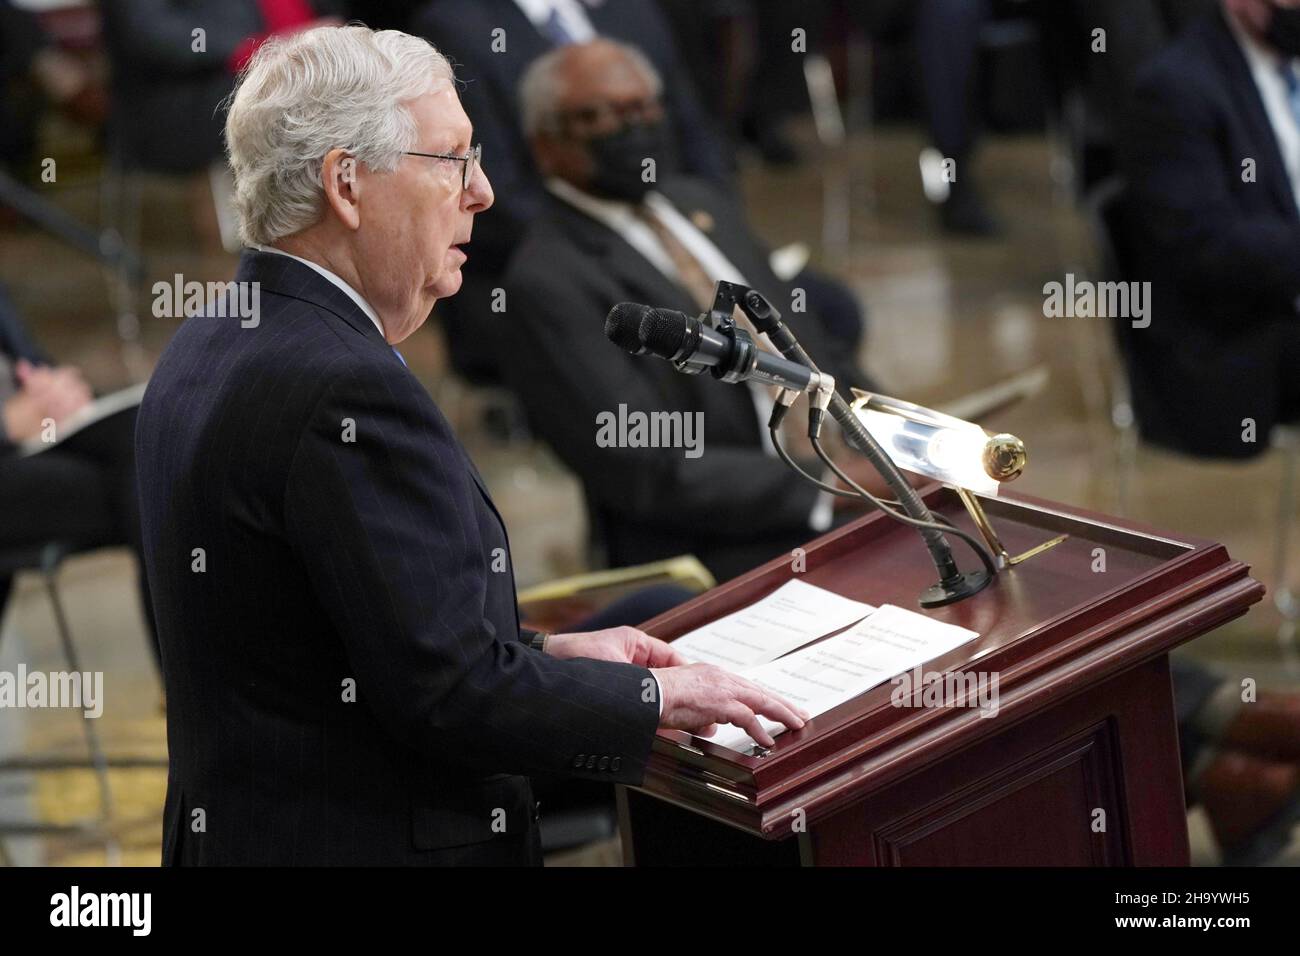 Senate Minority Leader Mitch McConnell (R-KY) speaks as people gather to pay their respects to former Senator Bob Dole (R-KS) as he lies in state at the Rotunda of the U.S. Capitol in Washington, D.C. on Thursday, December 9, 2021. (Photo by Sarahbeth Maney/Pool/Sipa USA) Stock Photo